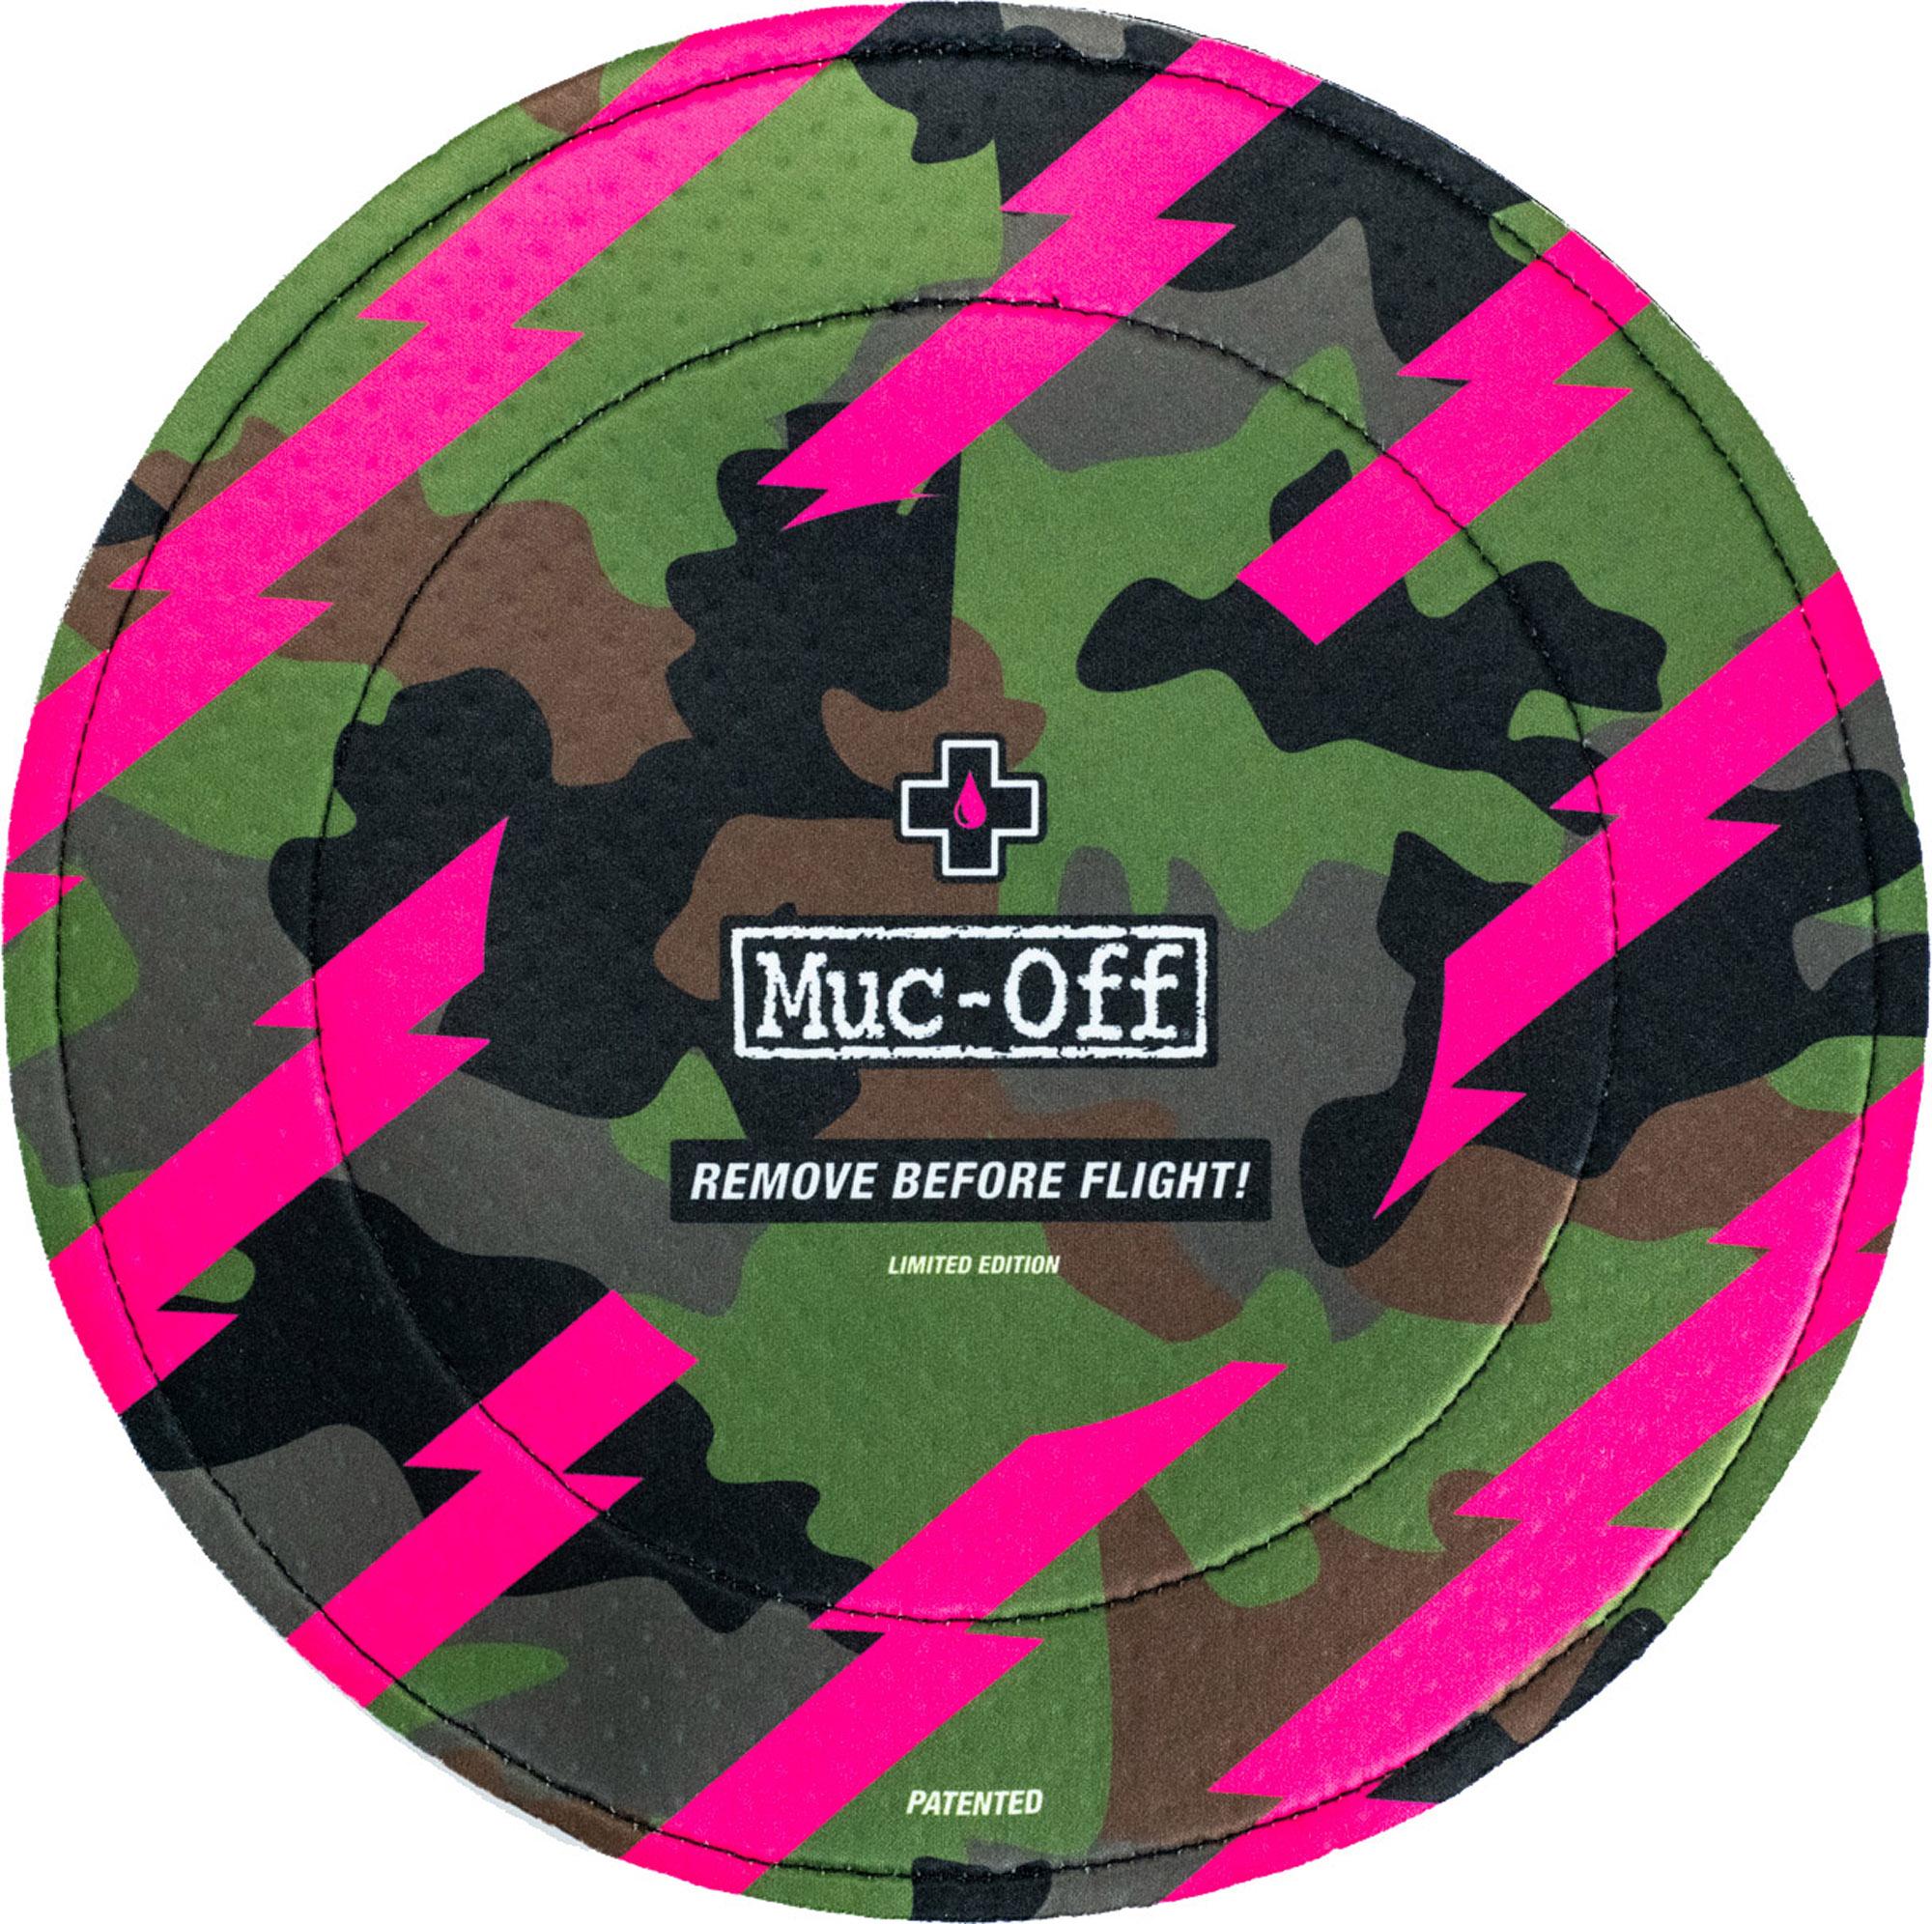 Muc-off Disc Brake Covers - Camouflage